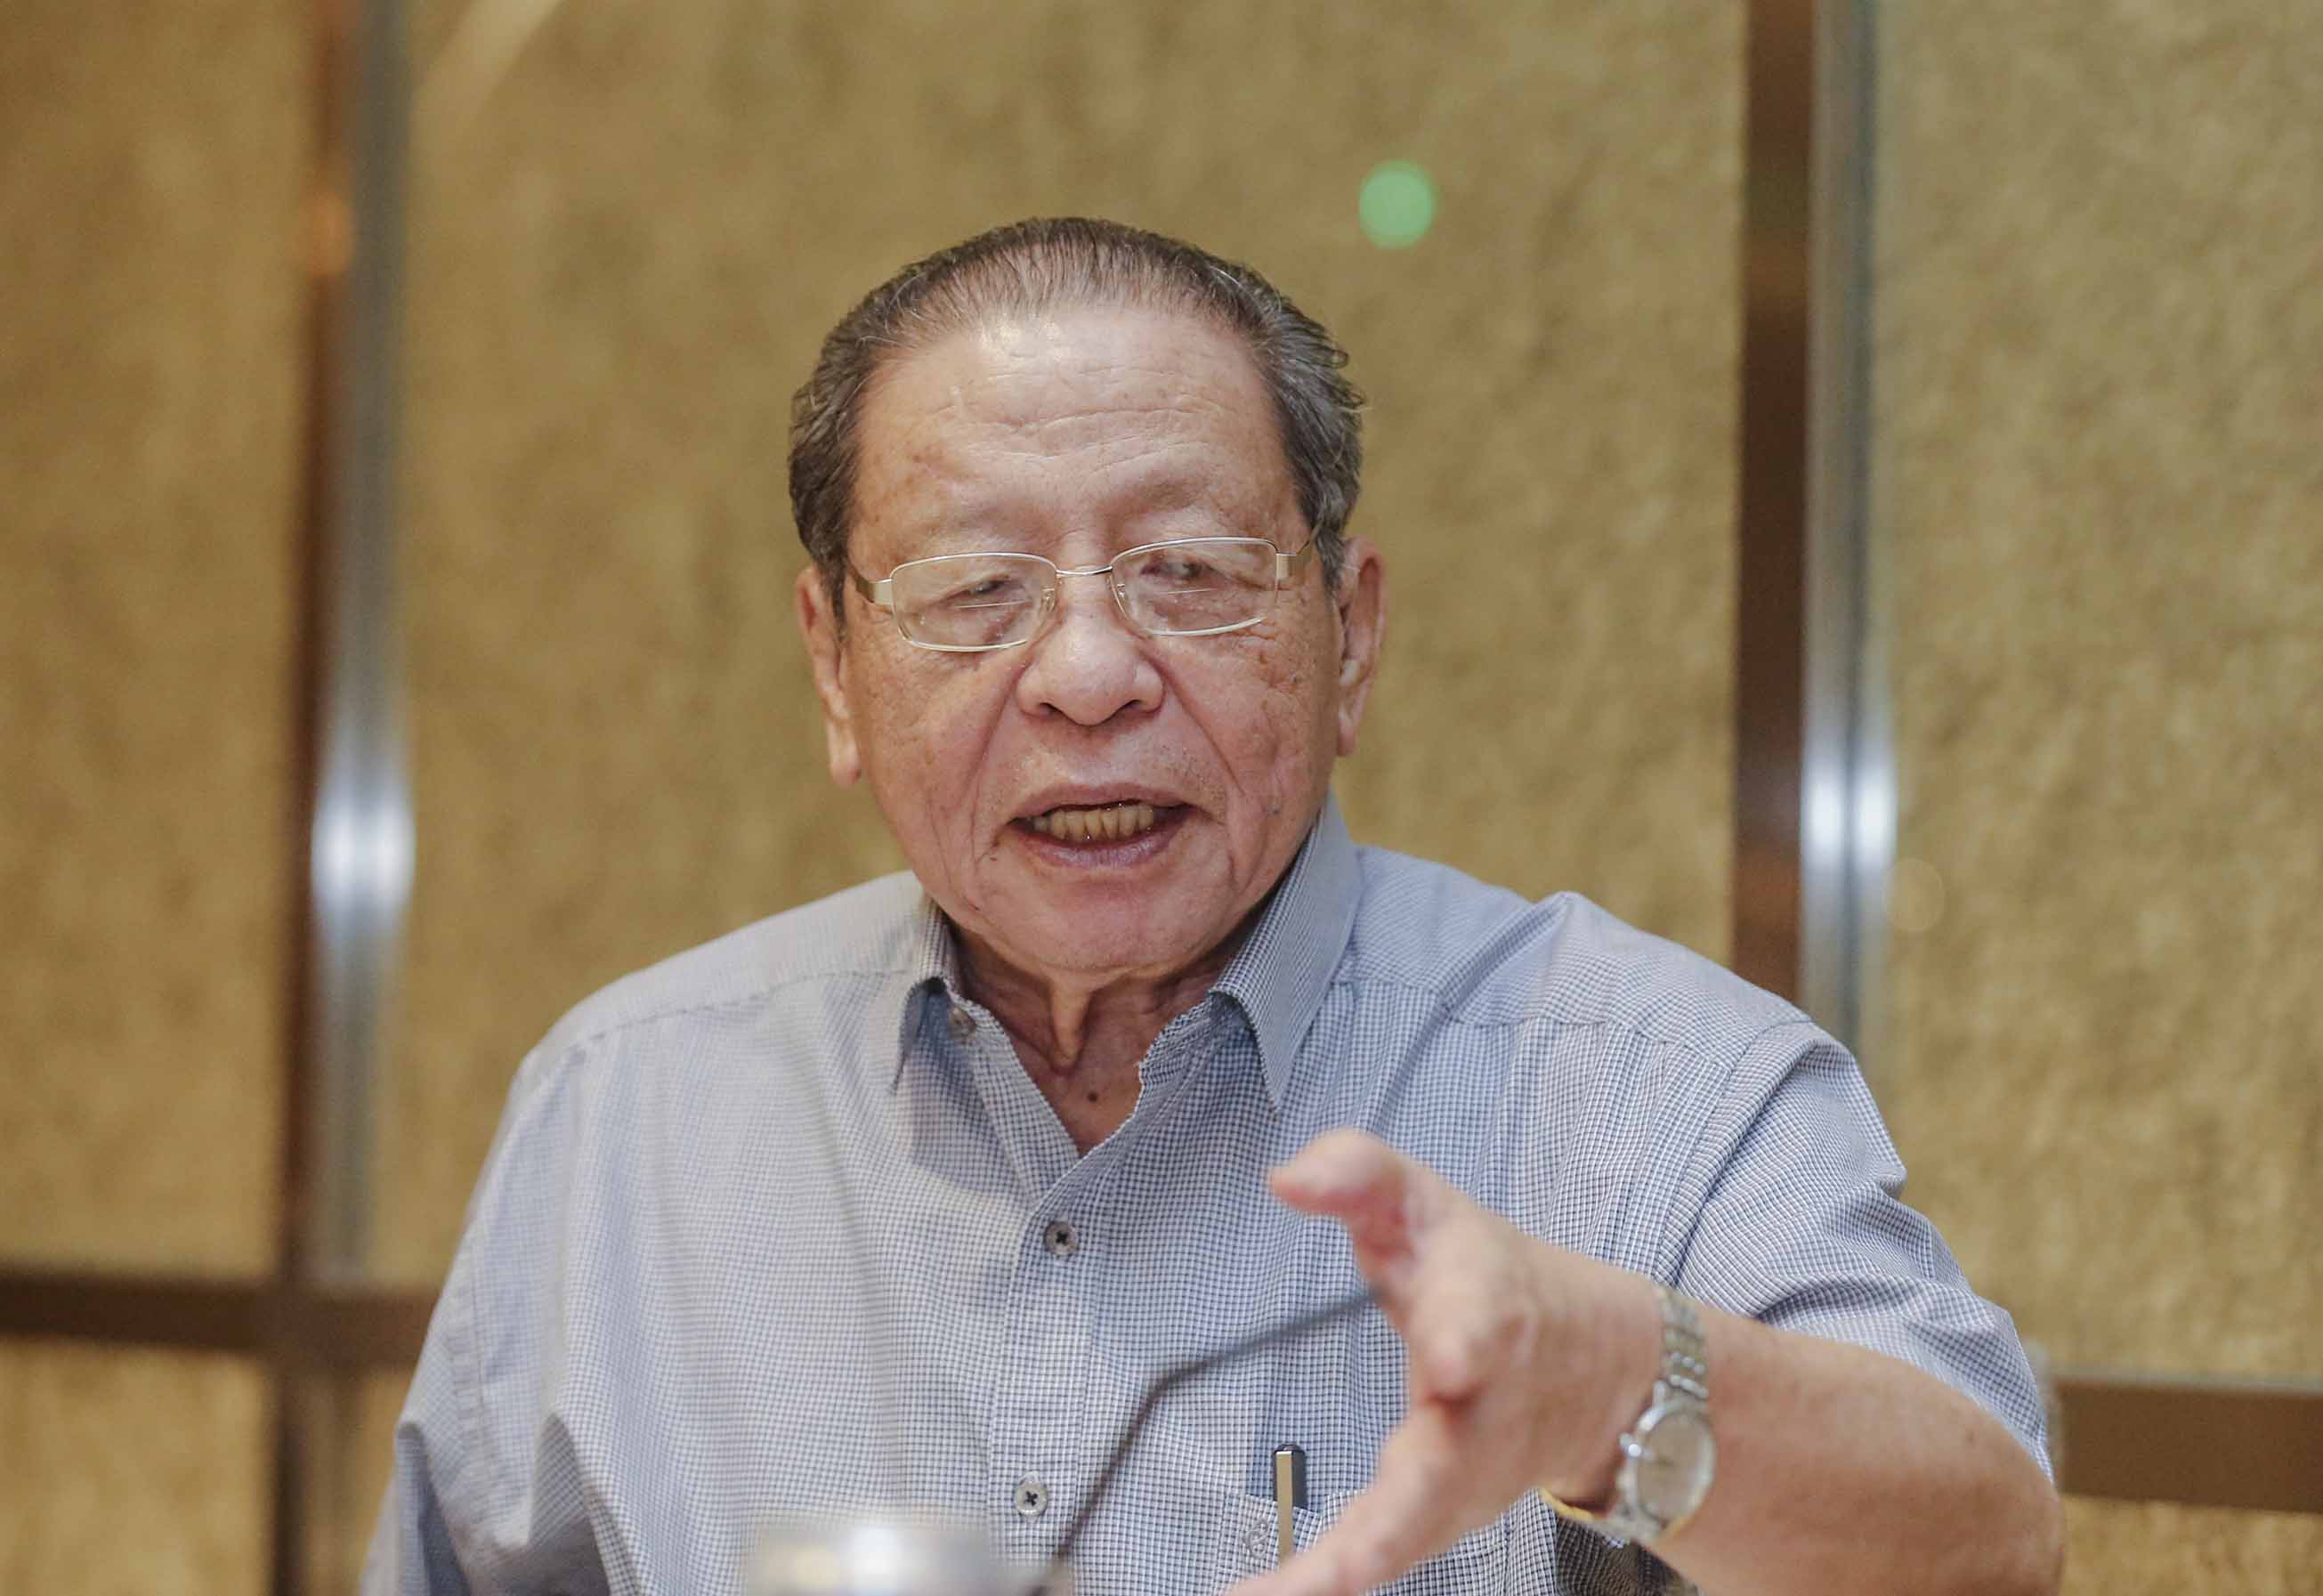 The DAP leader repeatedly reminded Tan Sri Muhyiddin Yassin of the latter’s own pledges, quoting those made across the prime minister’s many special addresses since the start of the pandemic. — Picture by Firdaus Latif